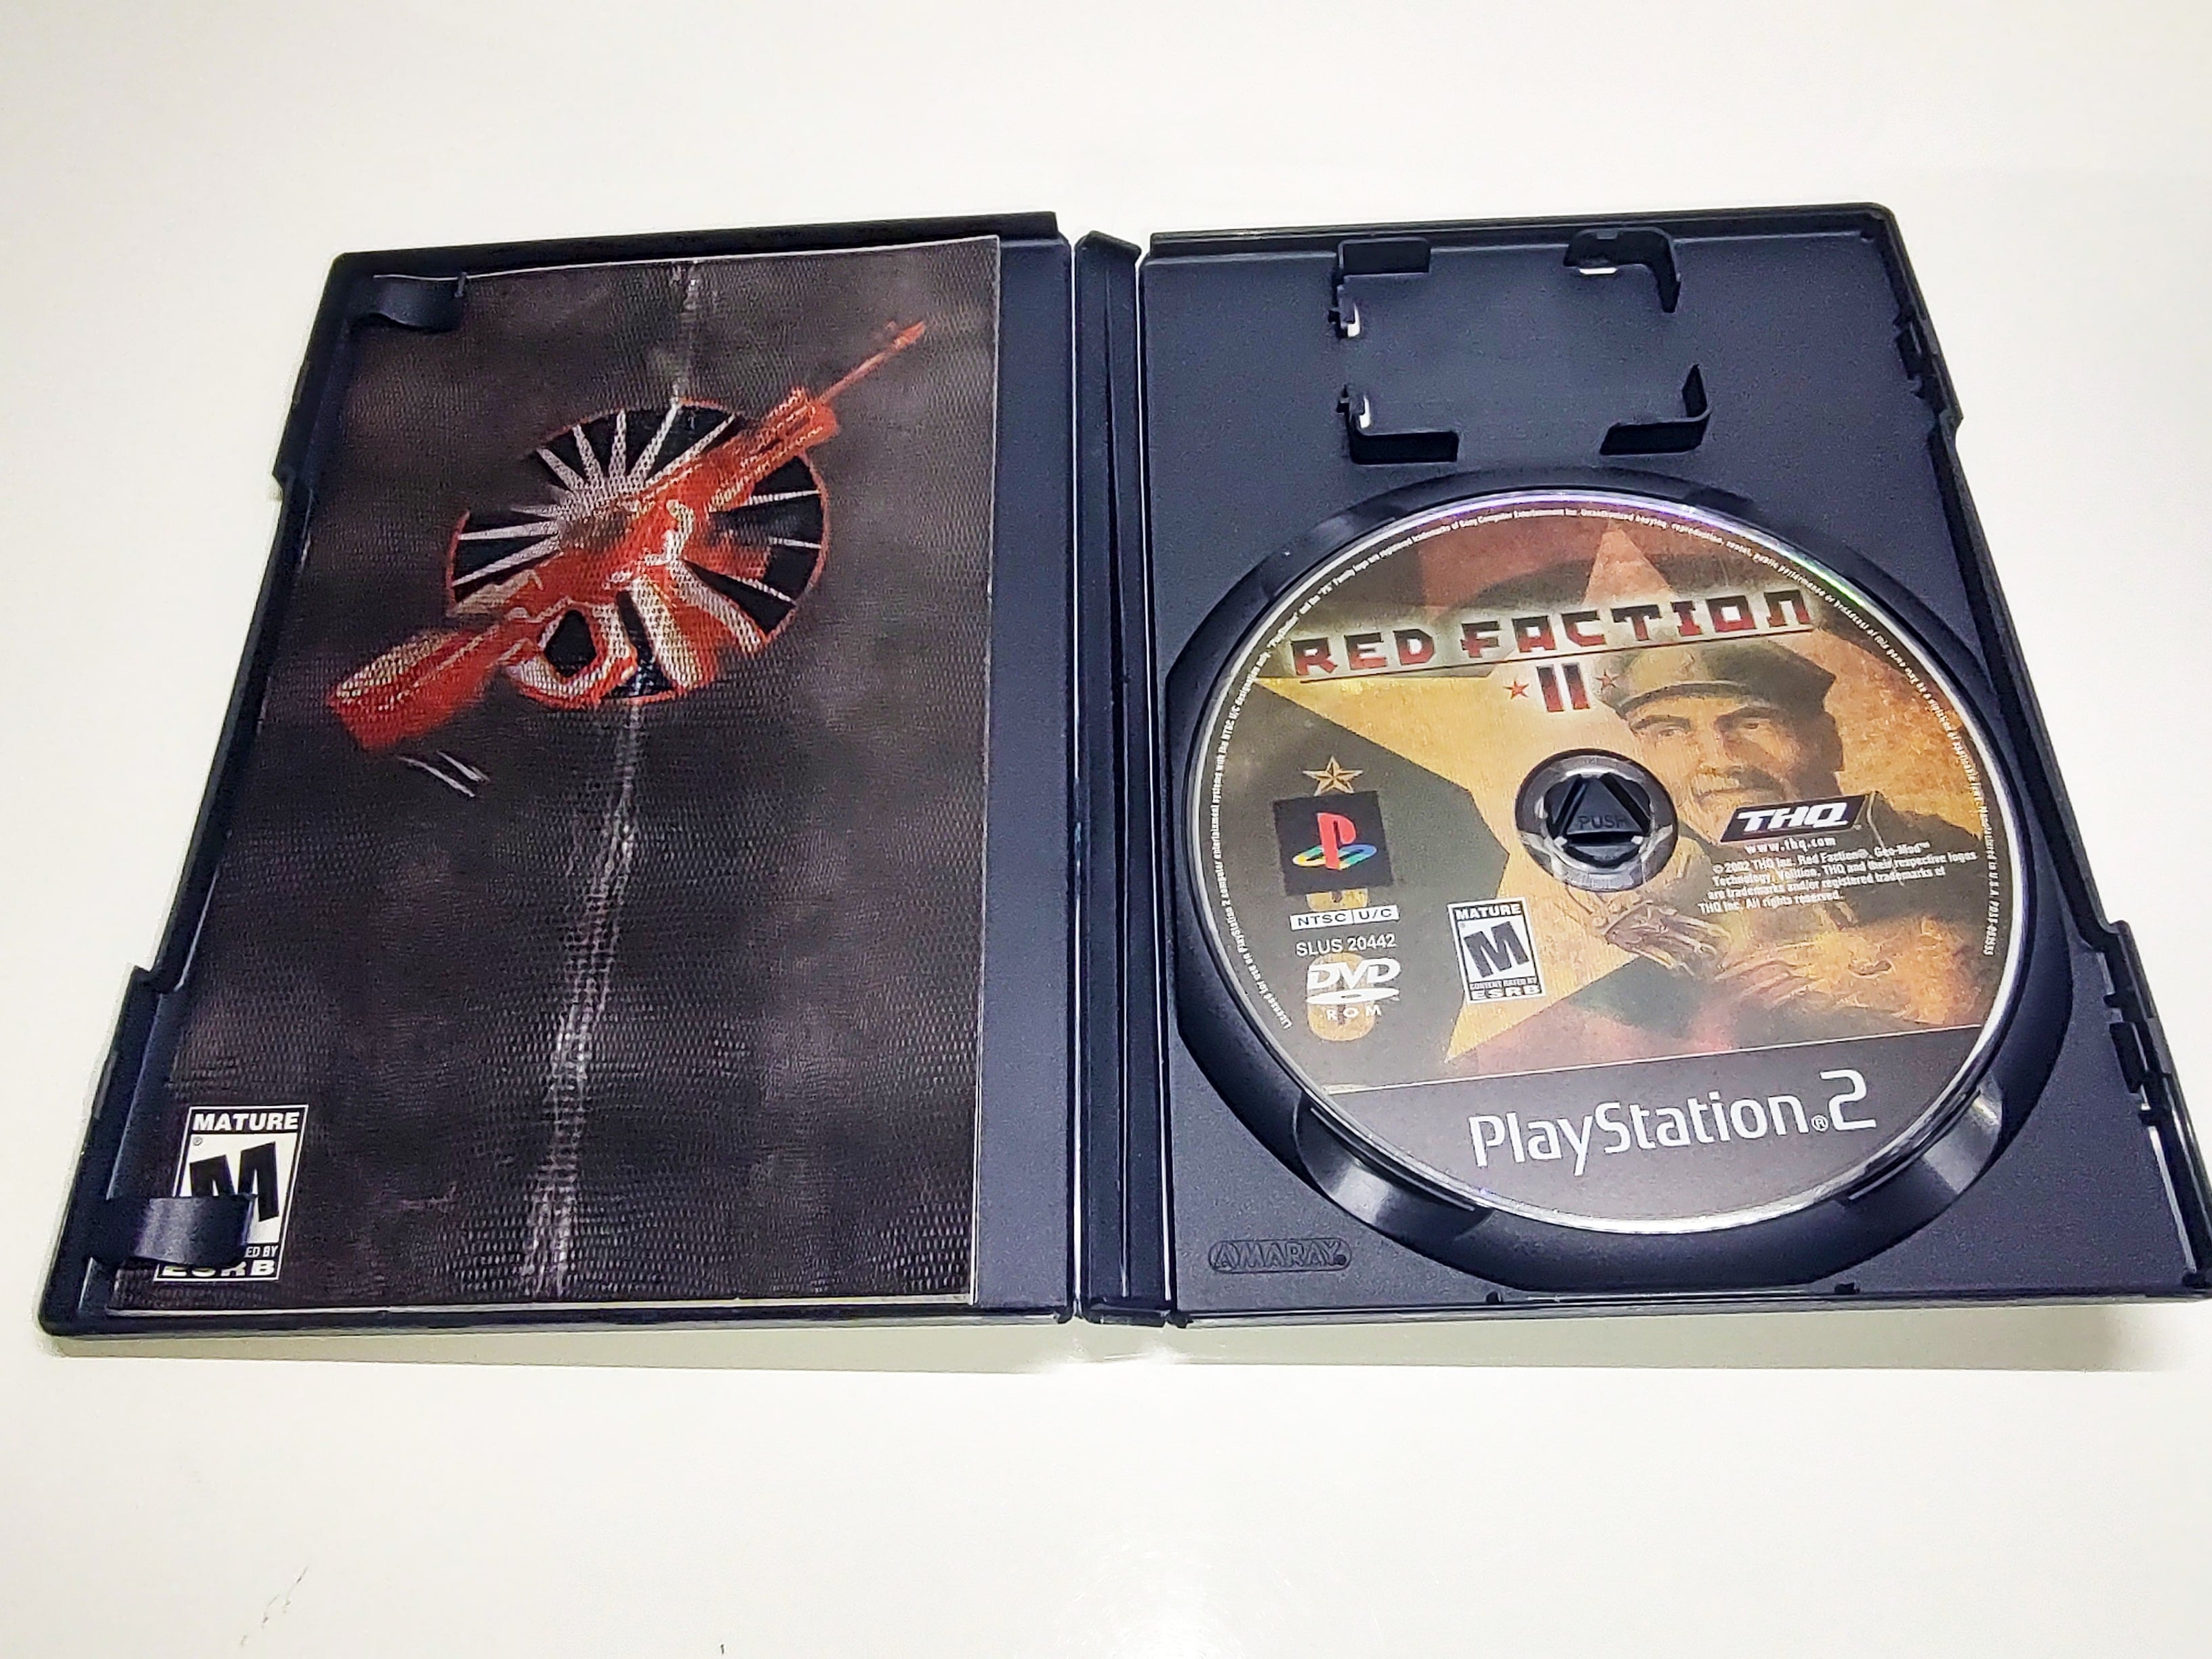 Red Faction II | PlayStation 2 | Case, Manual and Disc